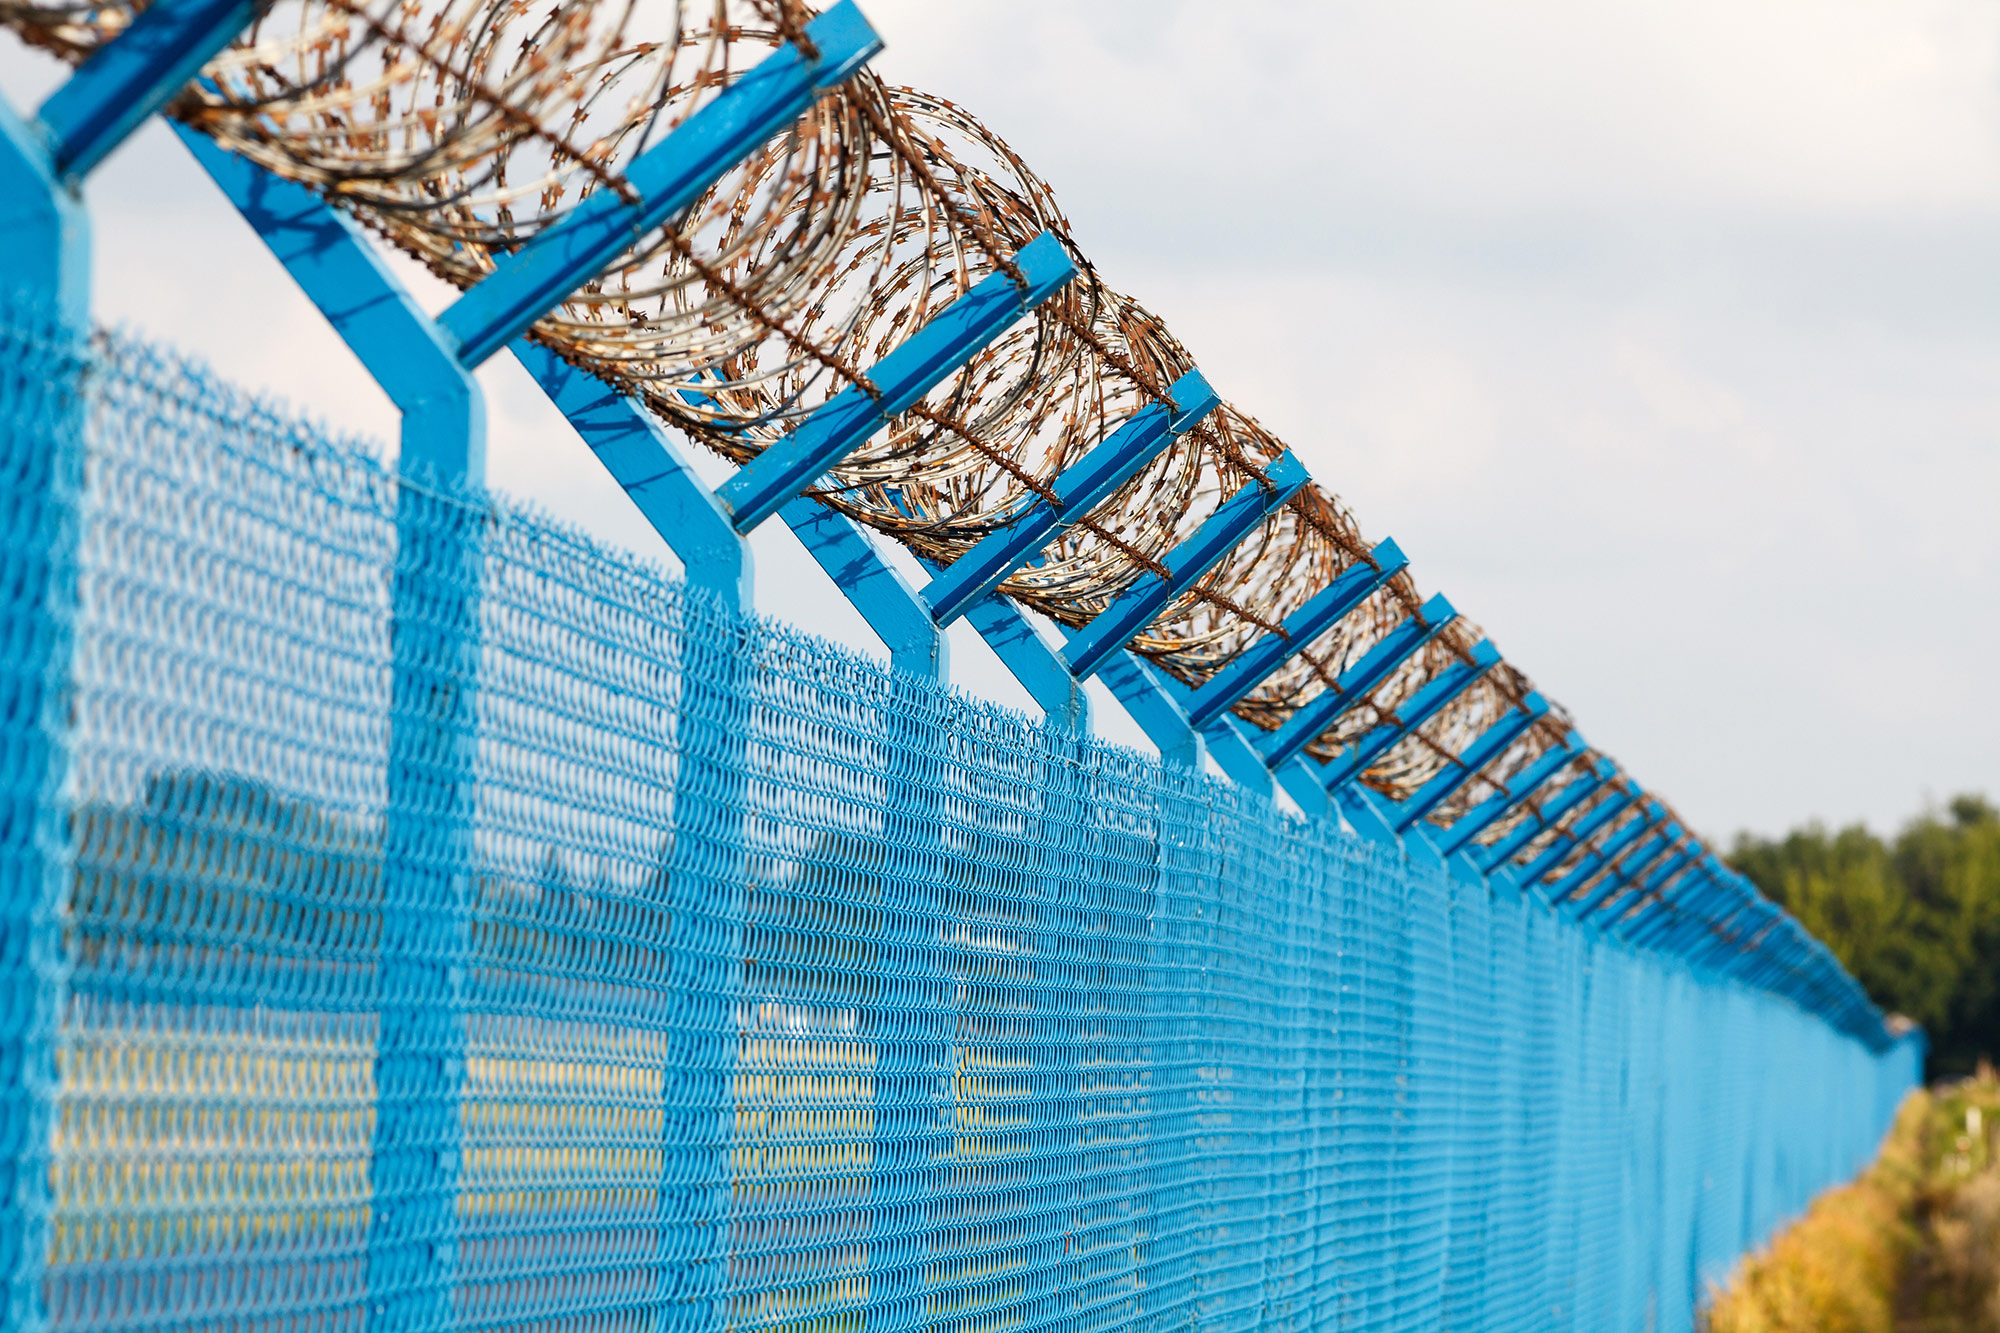 Chainlink Fencing - Gramm Barriers Systems